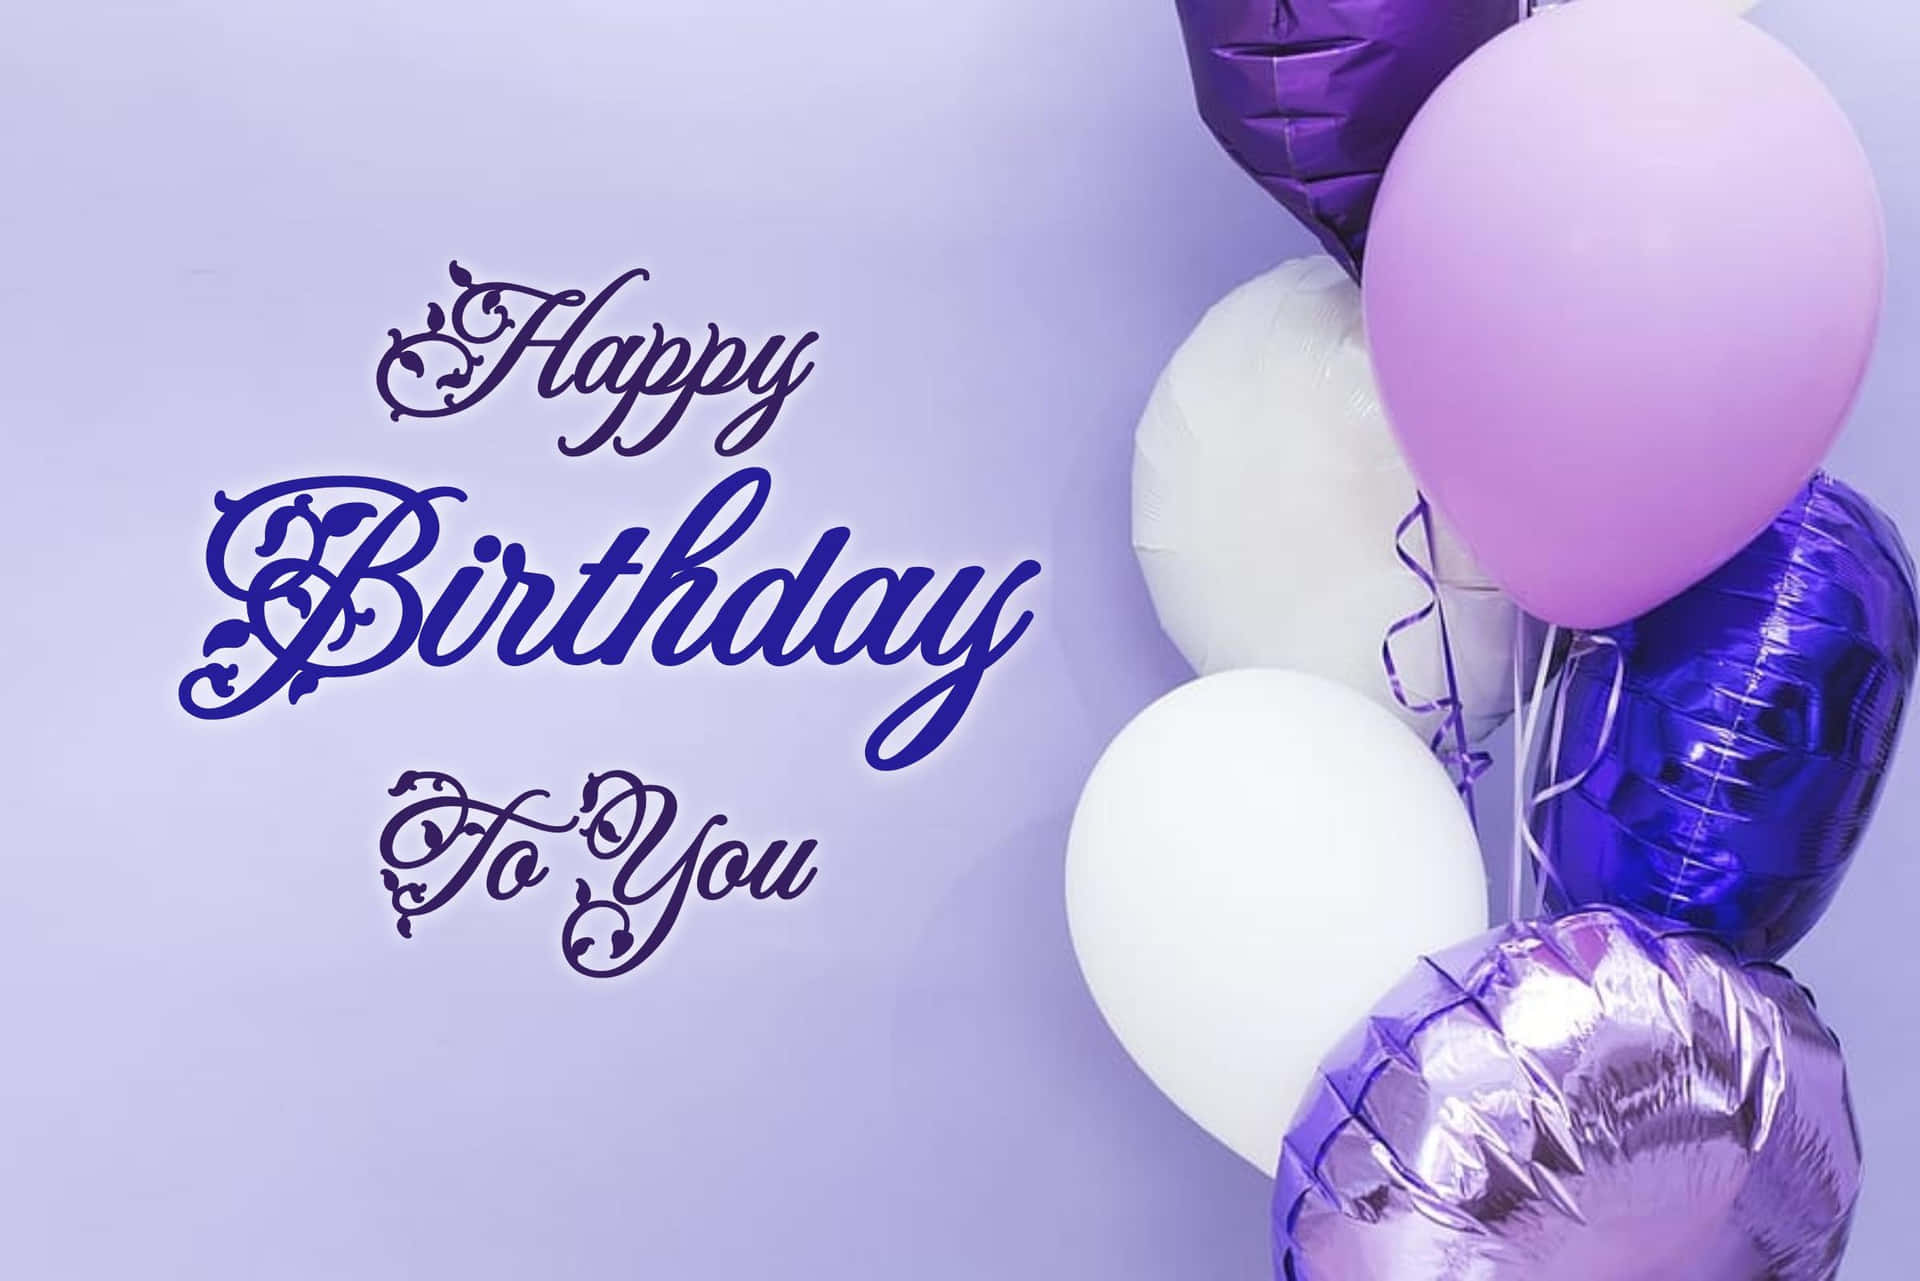 Celebrate your special day with this bright and vibrant high resolution happy birthday wallpaper